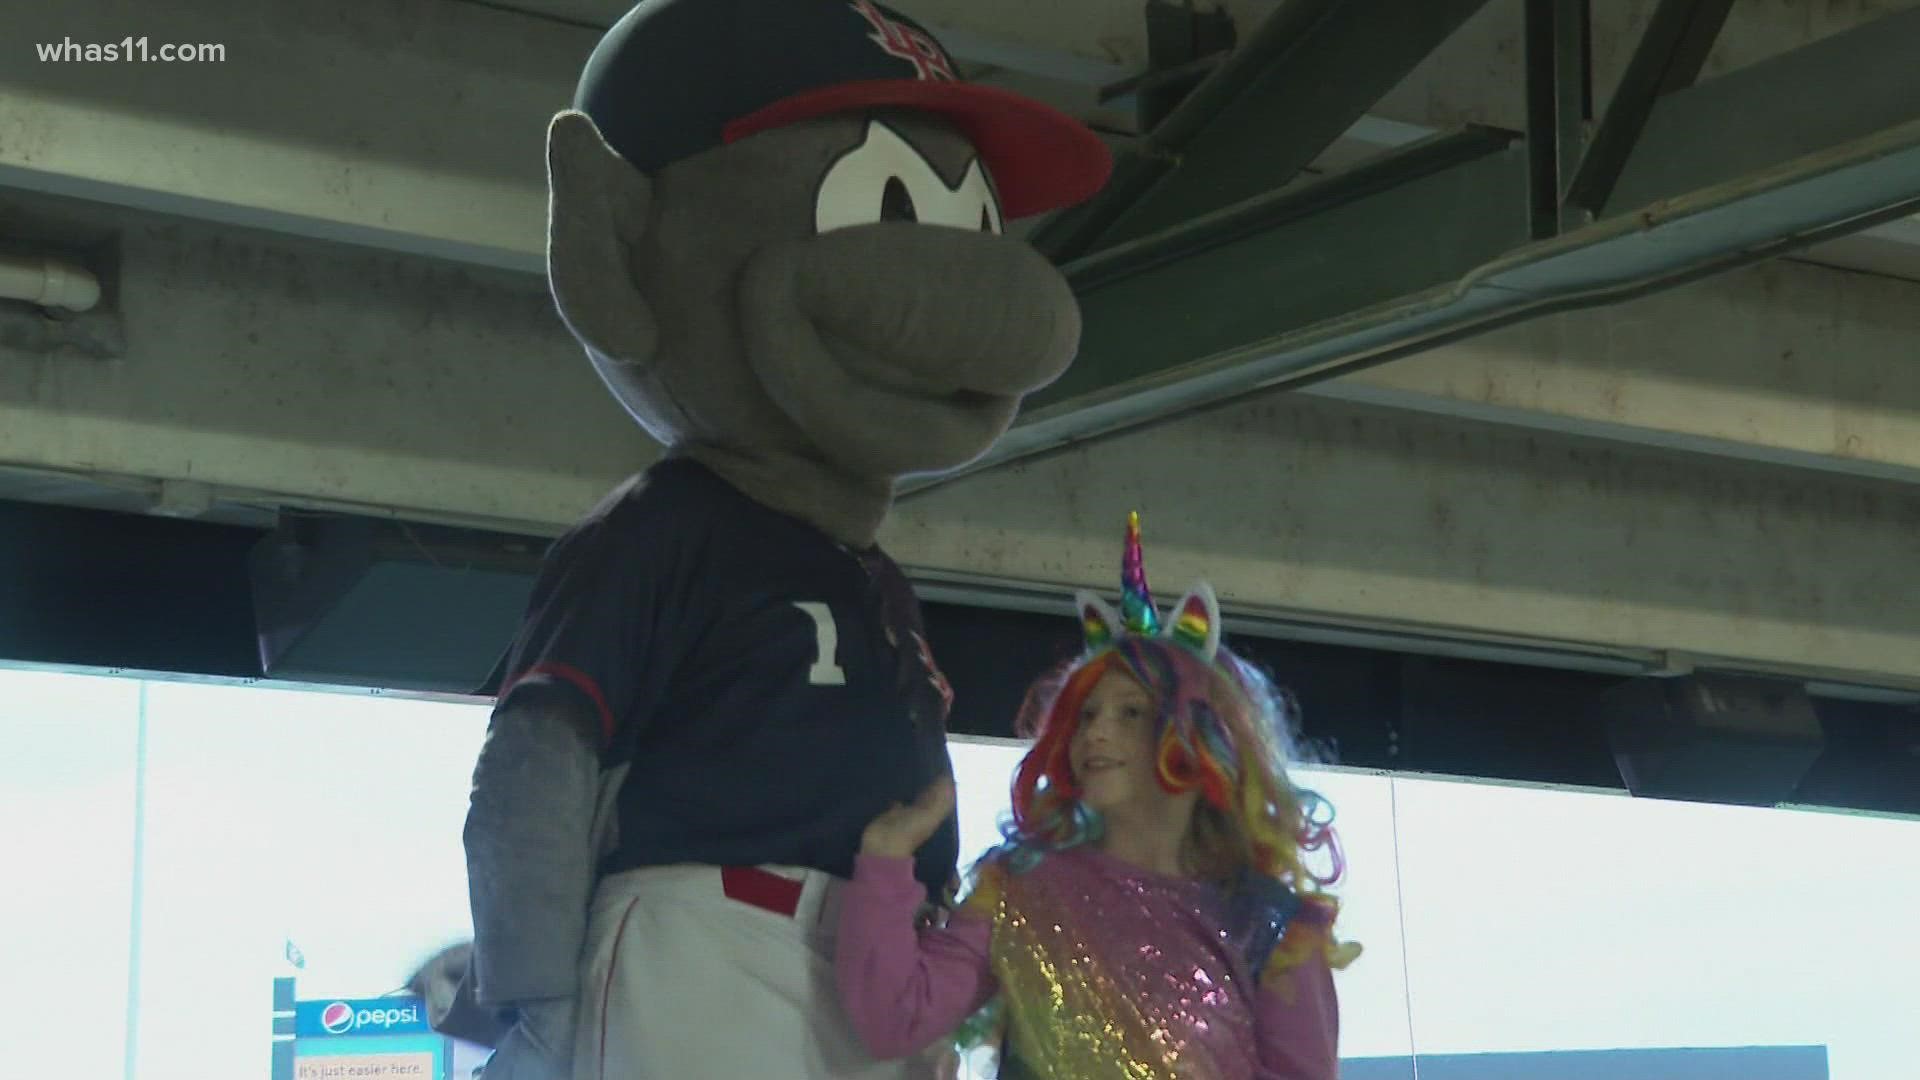 Trick-or-Treaters gathered at the baseball stadium for the first ever Halloween event.